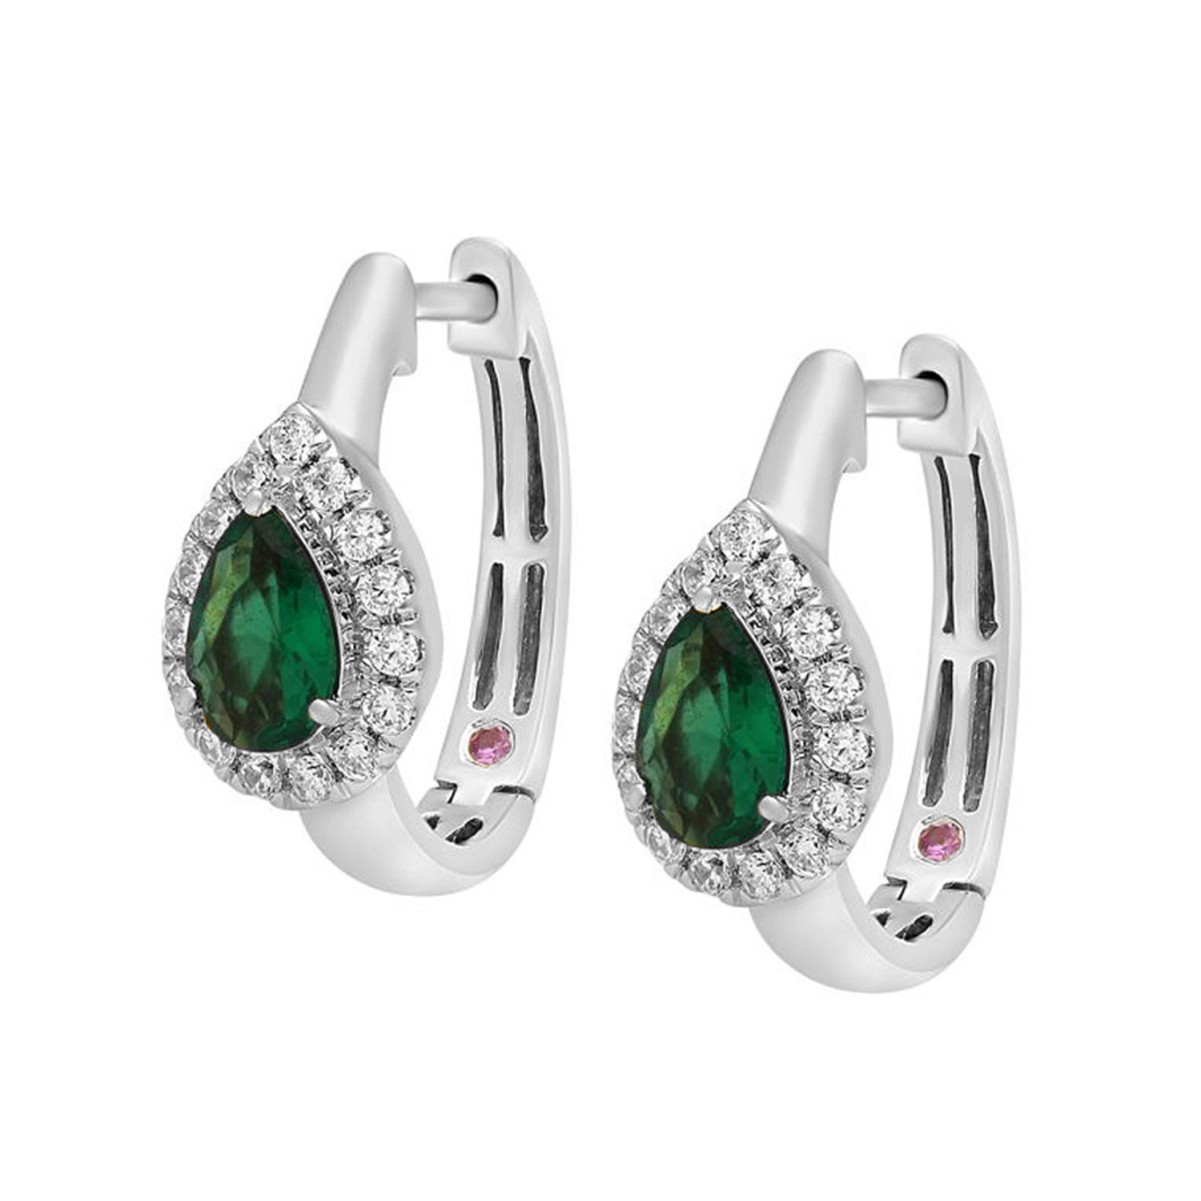 14K WHITE GOLD 1CT ROUND/PEAR DIAMOND LADIES HOOPS EARRINGS(COLOR STONE PEAR GREEN EMERALD DIAMOND 3/4CT)